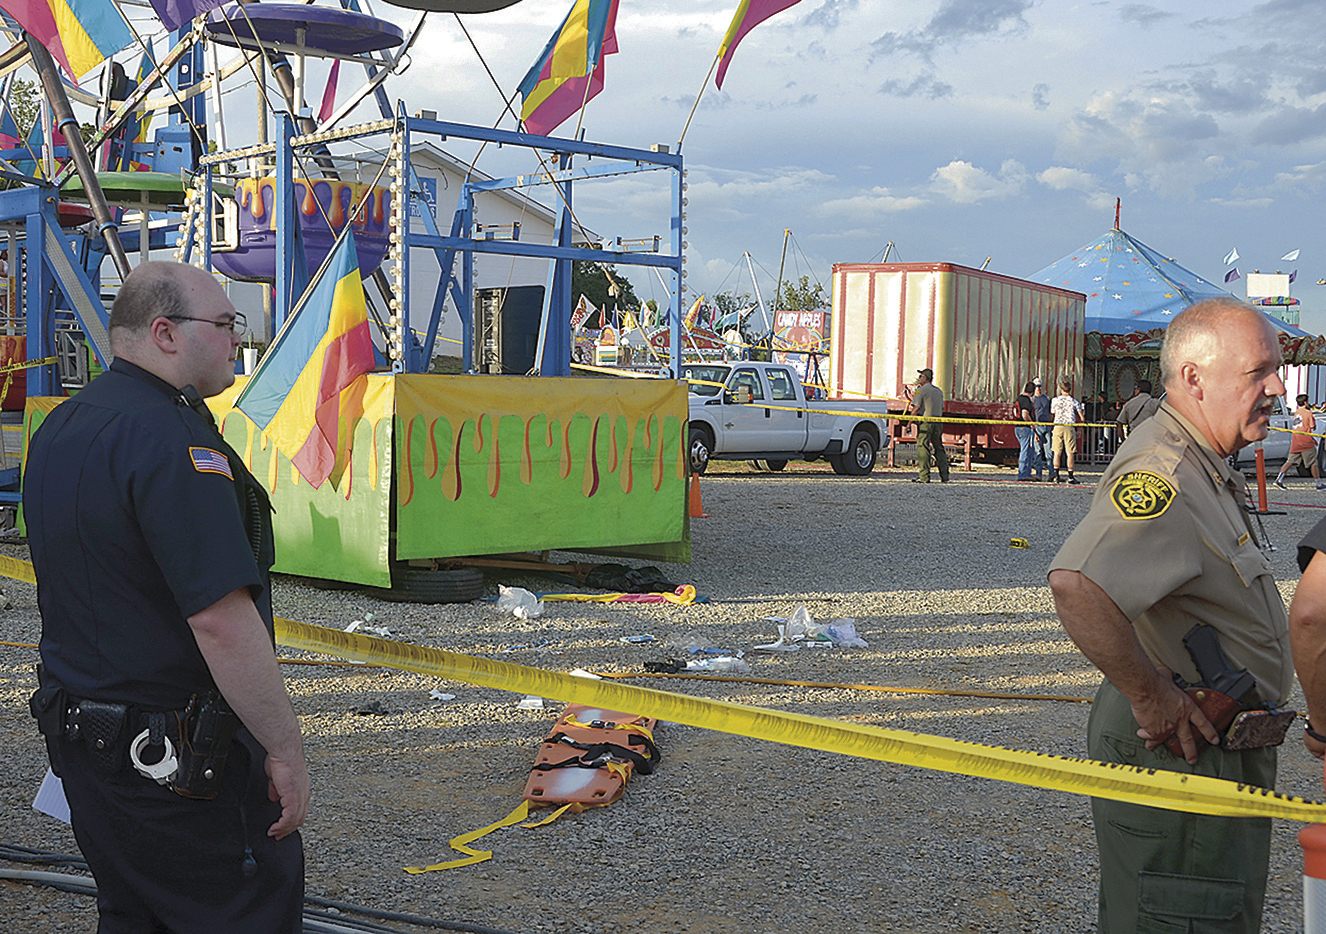 PHOTO: Law enforcement gather around the Ferris wheel Tuesday, Aug. 9, 2016, where debris is visible after an accident at a county fairground Monday night in Greenville, Tenn.